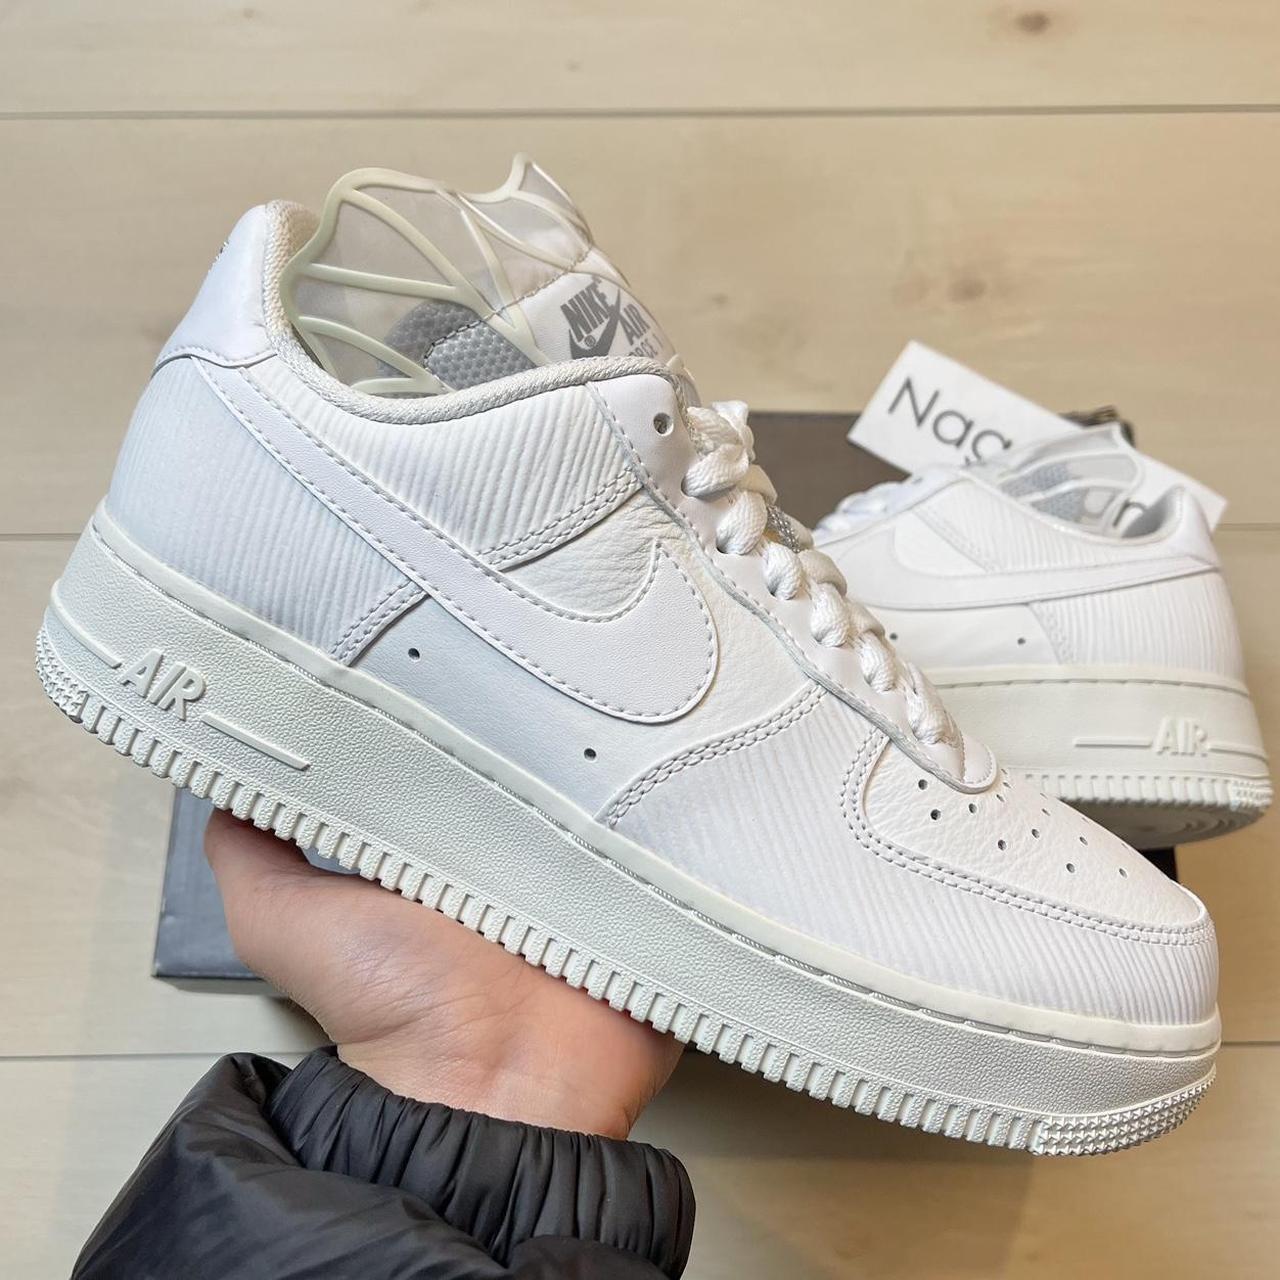 NIKE Women's Air Force 1 '07 Special Edition - Size 8